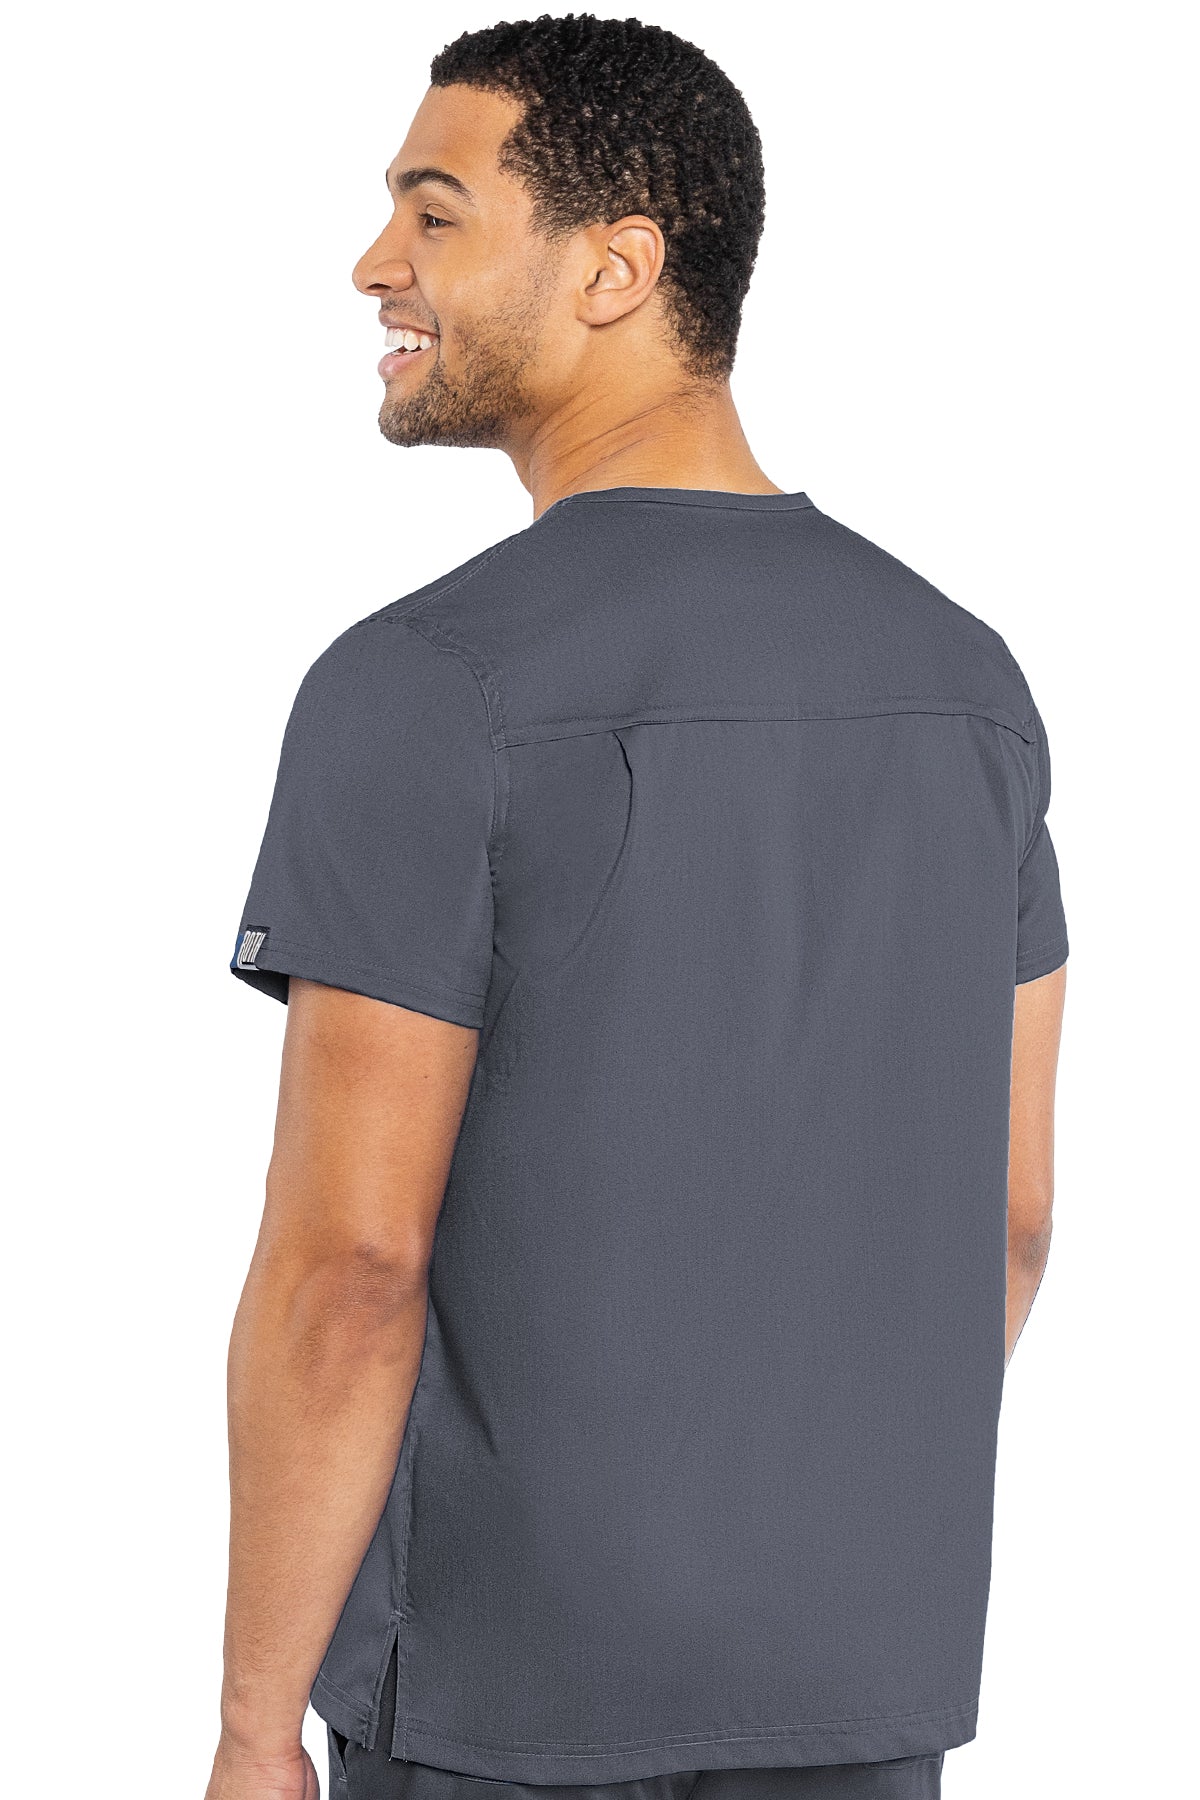 Cadence One Pocket Top by  Rothwear XS-3XL / Pewter